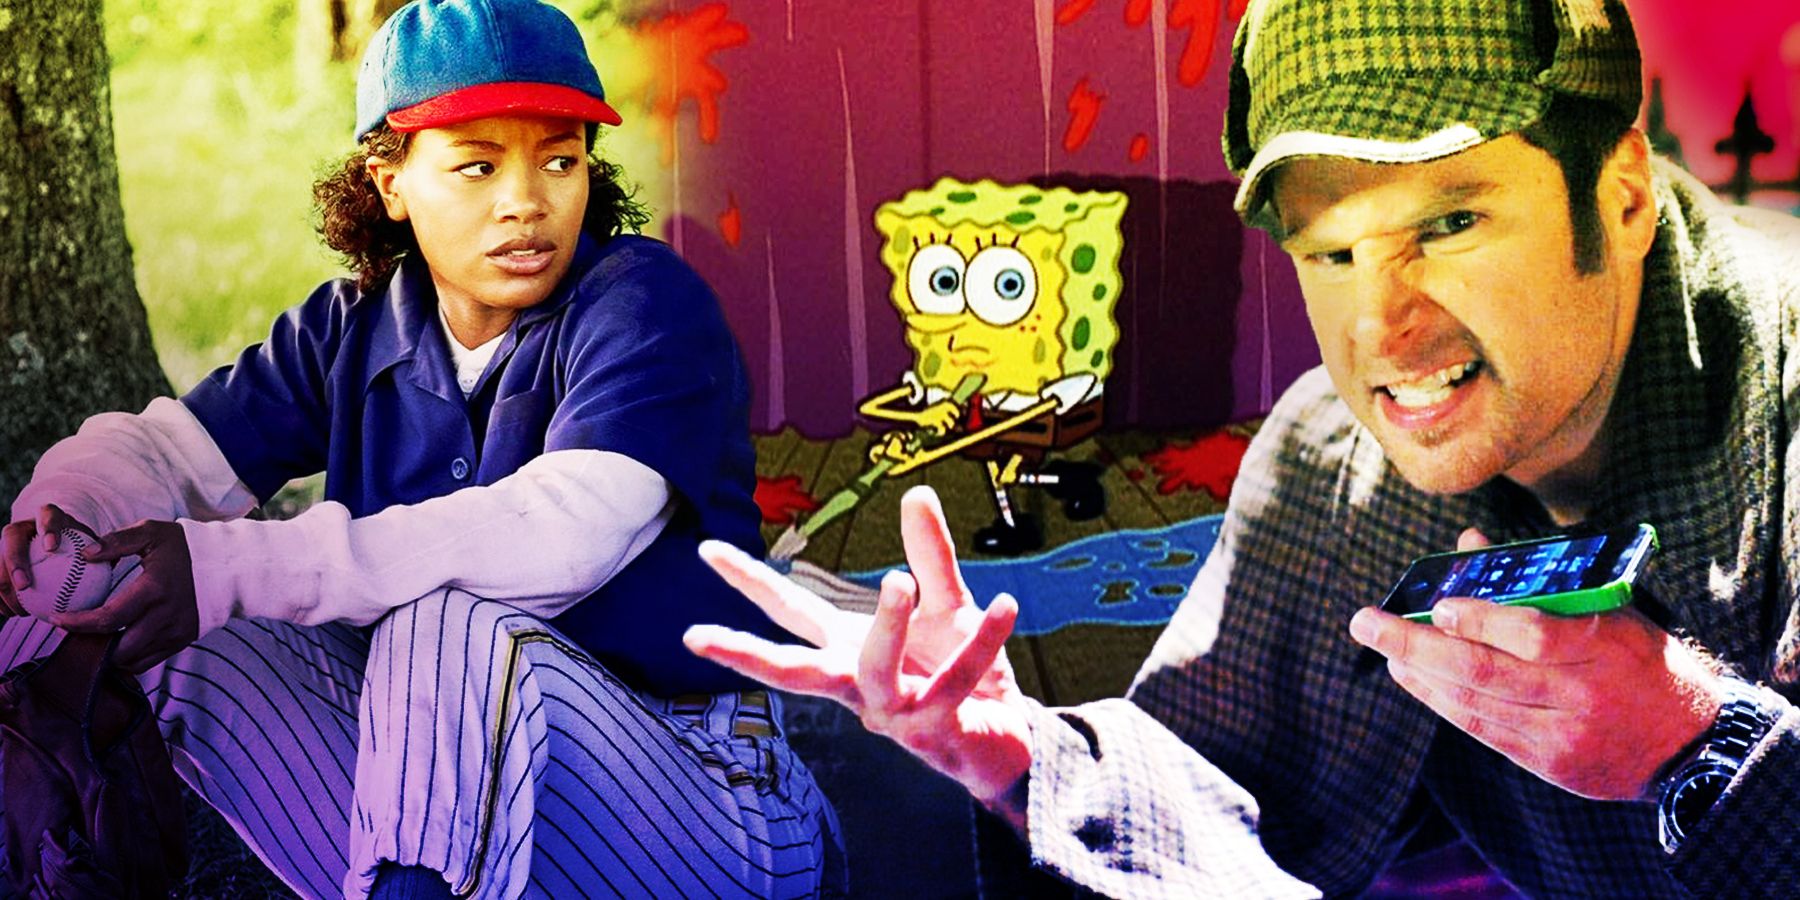 Maxine from show A League of Their Own, Spongebob from show Spongebob Squarepants, and Shawn from show Psych